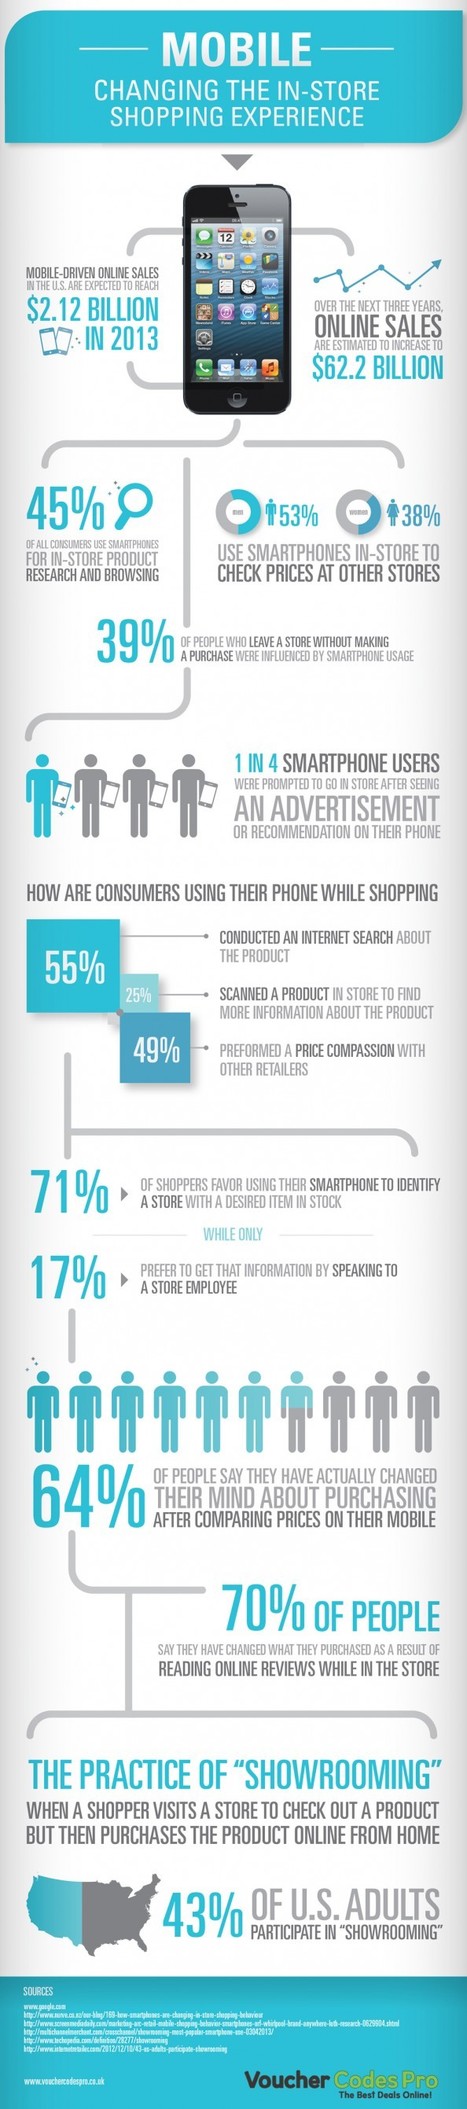 Phone, Store, Showroom: How Mobile Is Changing Retailing [Infogrpahic] | Mobile Technology | Scoop.it